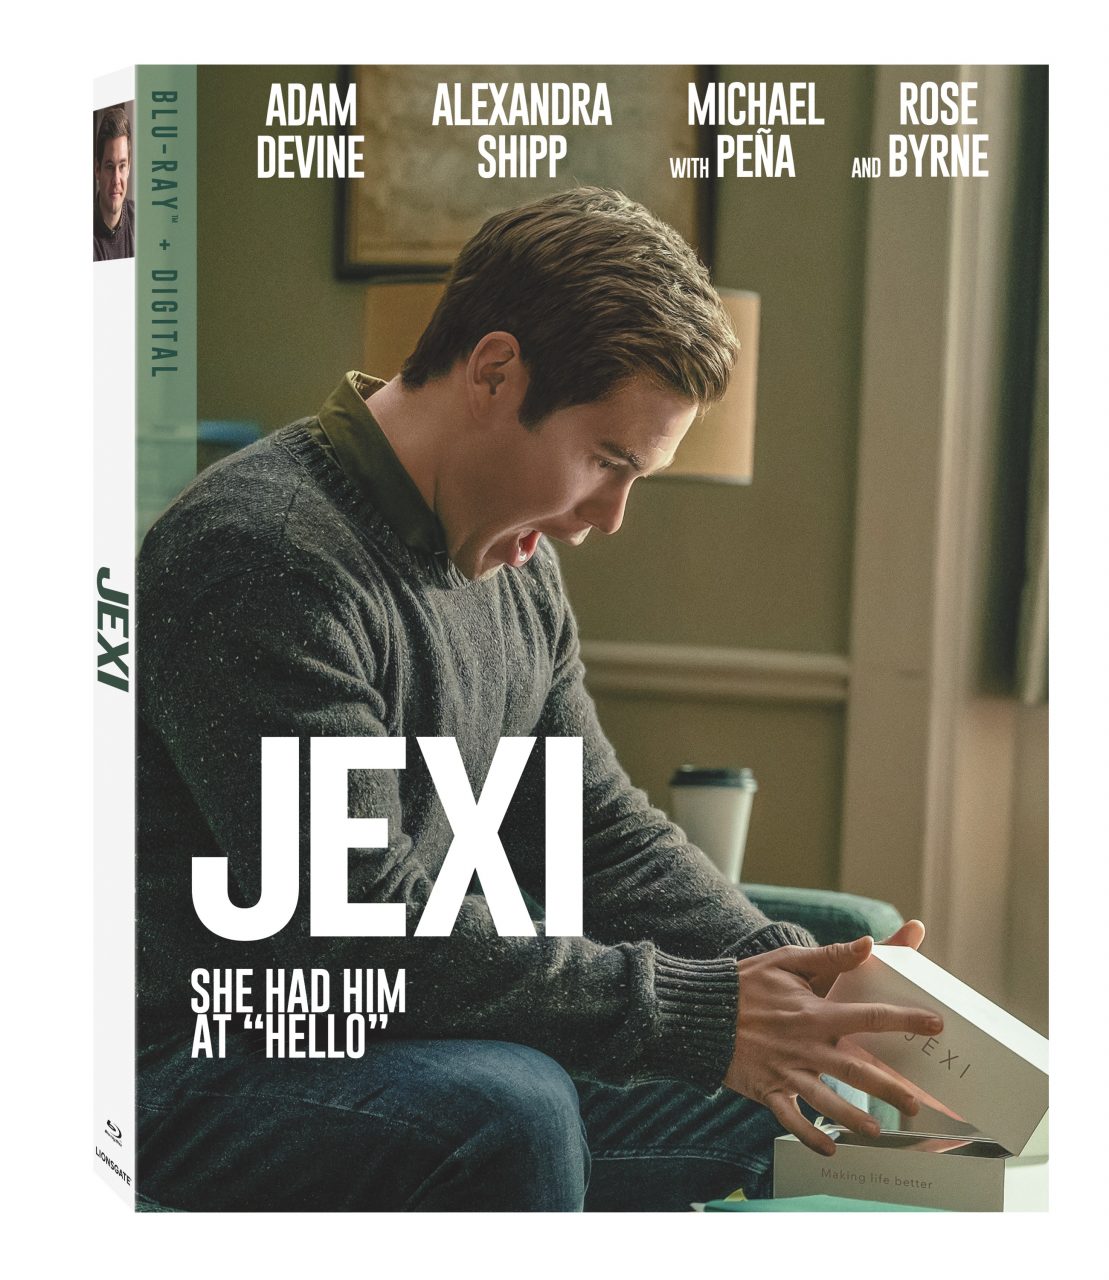 JEXI Blu-Ray Combo pack cover (Lionsgate Home Entertainment)